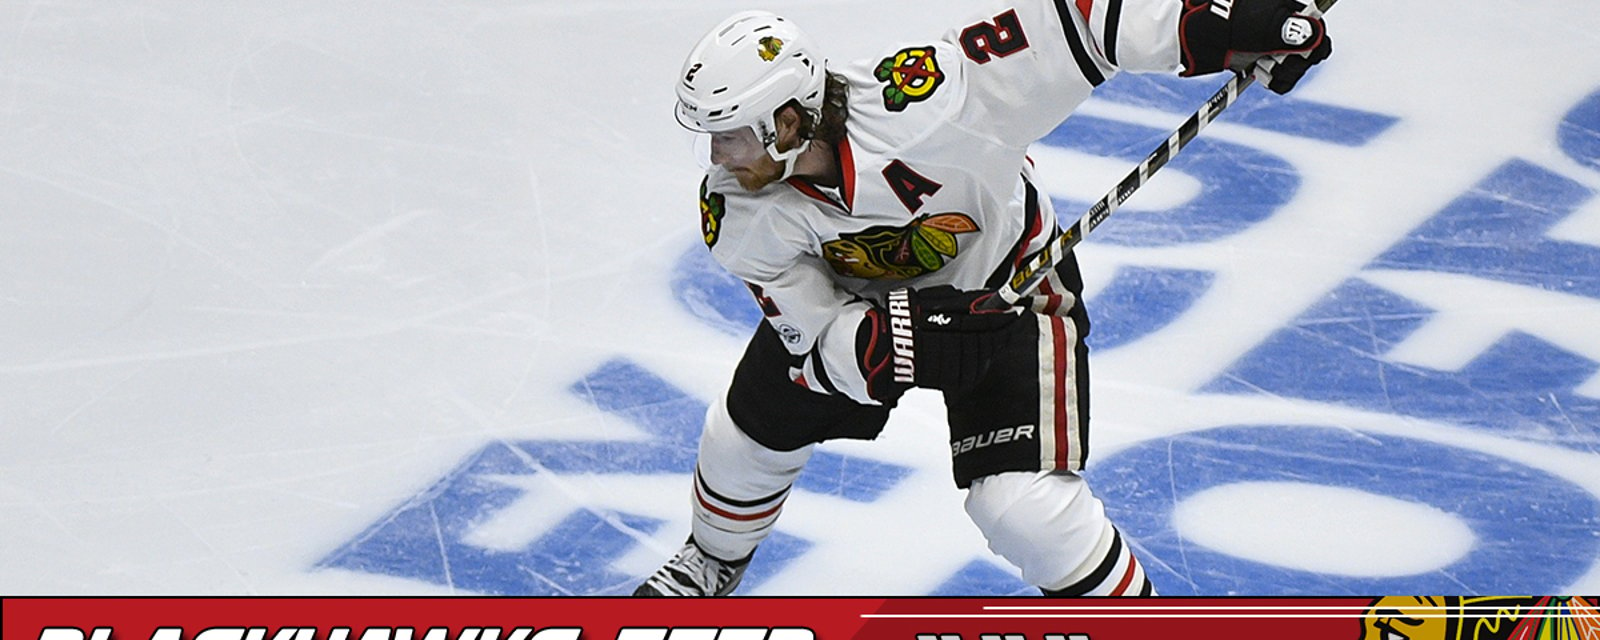 Report: What is going on with Duncan Keith?